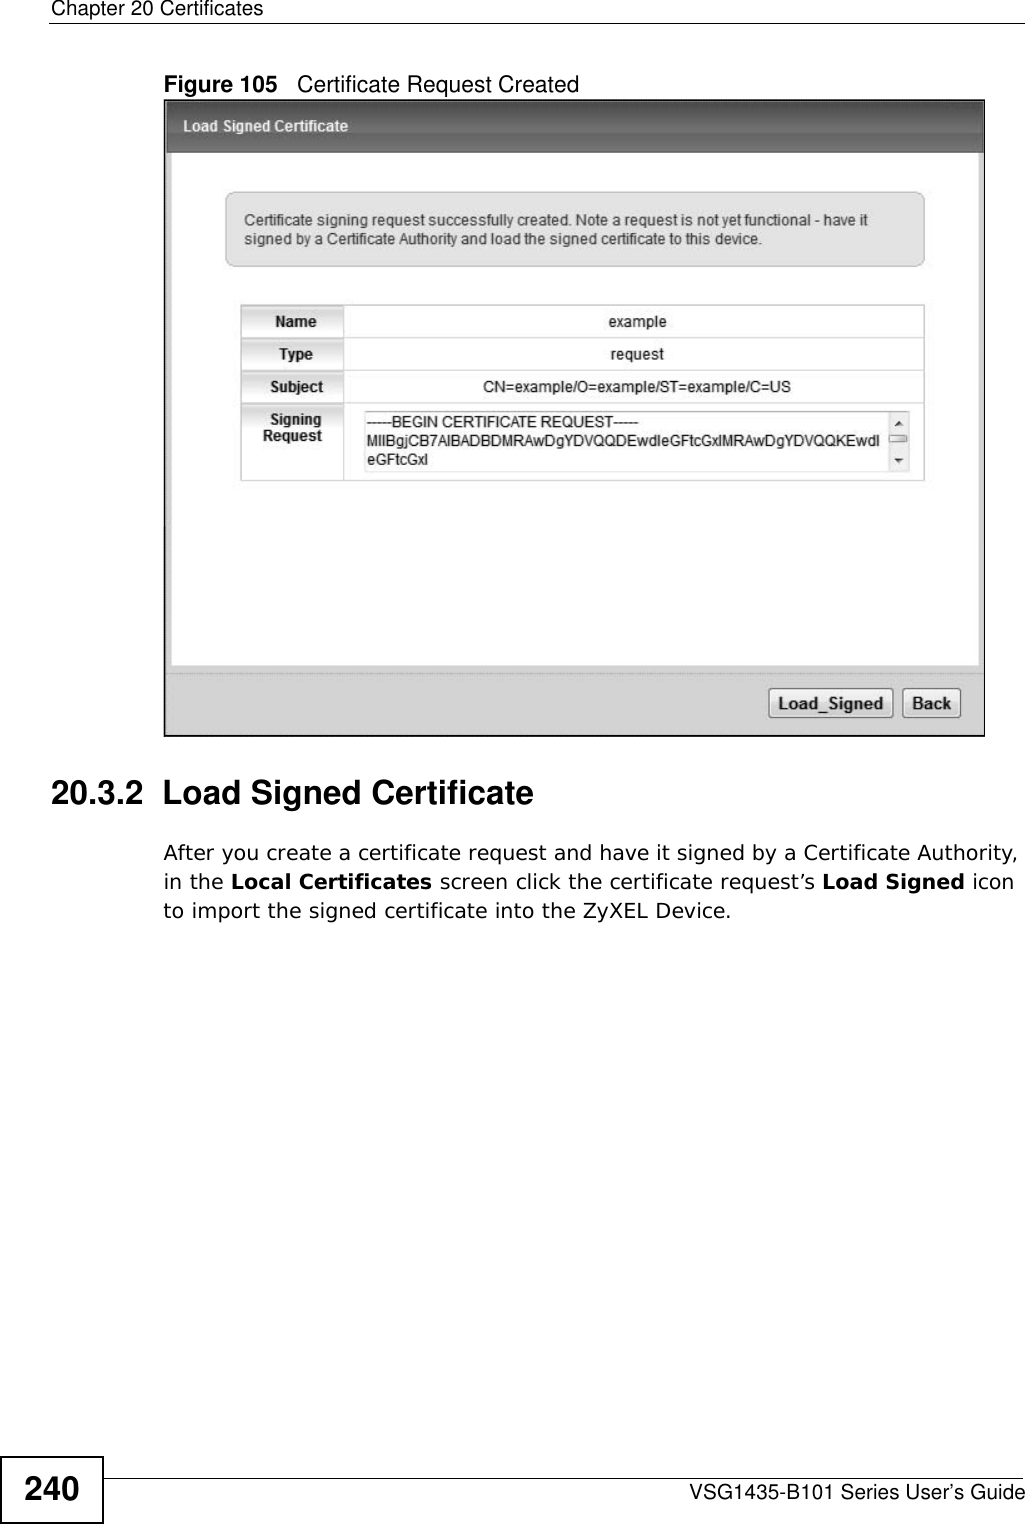 Chapter 20 CertificatesVSG1435-B101 Series User’s Guide240Figure 105   Certificate Request Created20.3.2  Load Signed Certificate After you create a certificate request and have it signed by a Certificate Authority, in the Local Certificates screen click the certificate request’s Load Signed icon to import the signed certificate into the ZyXEL Device. 